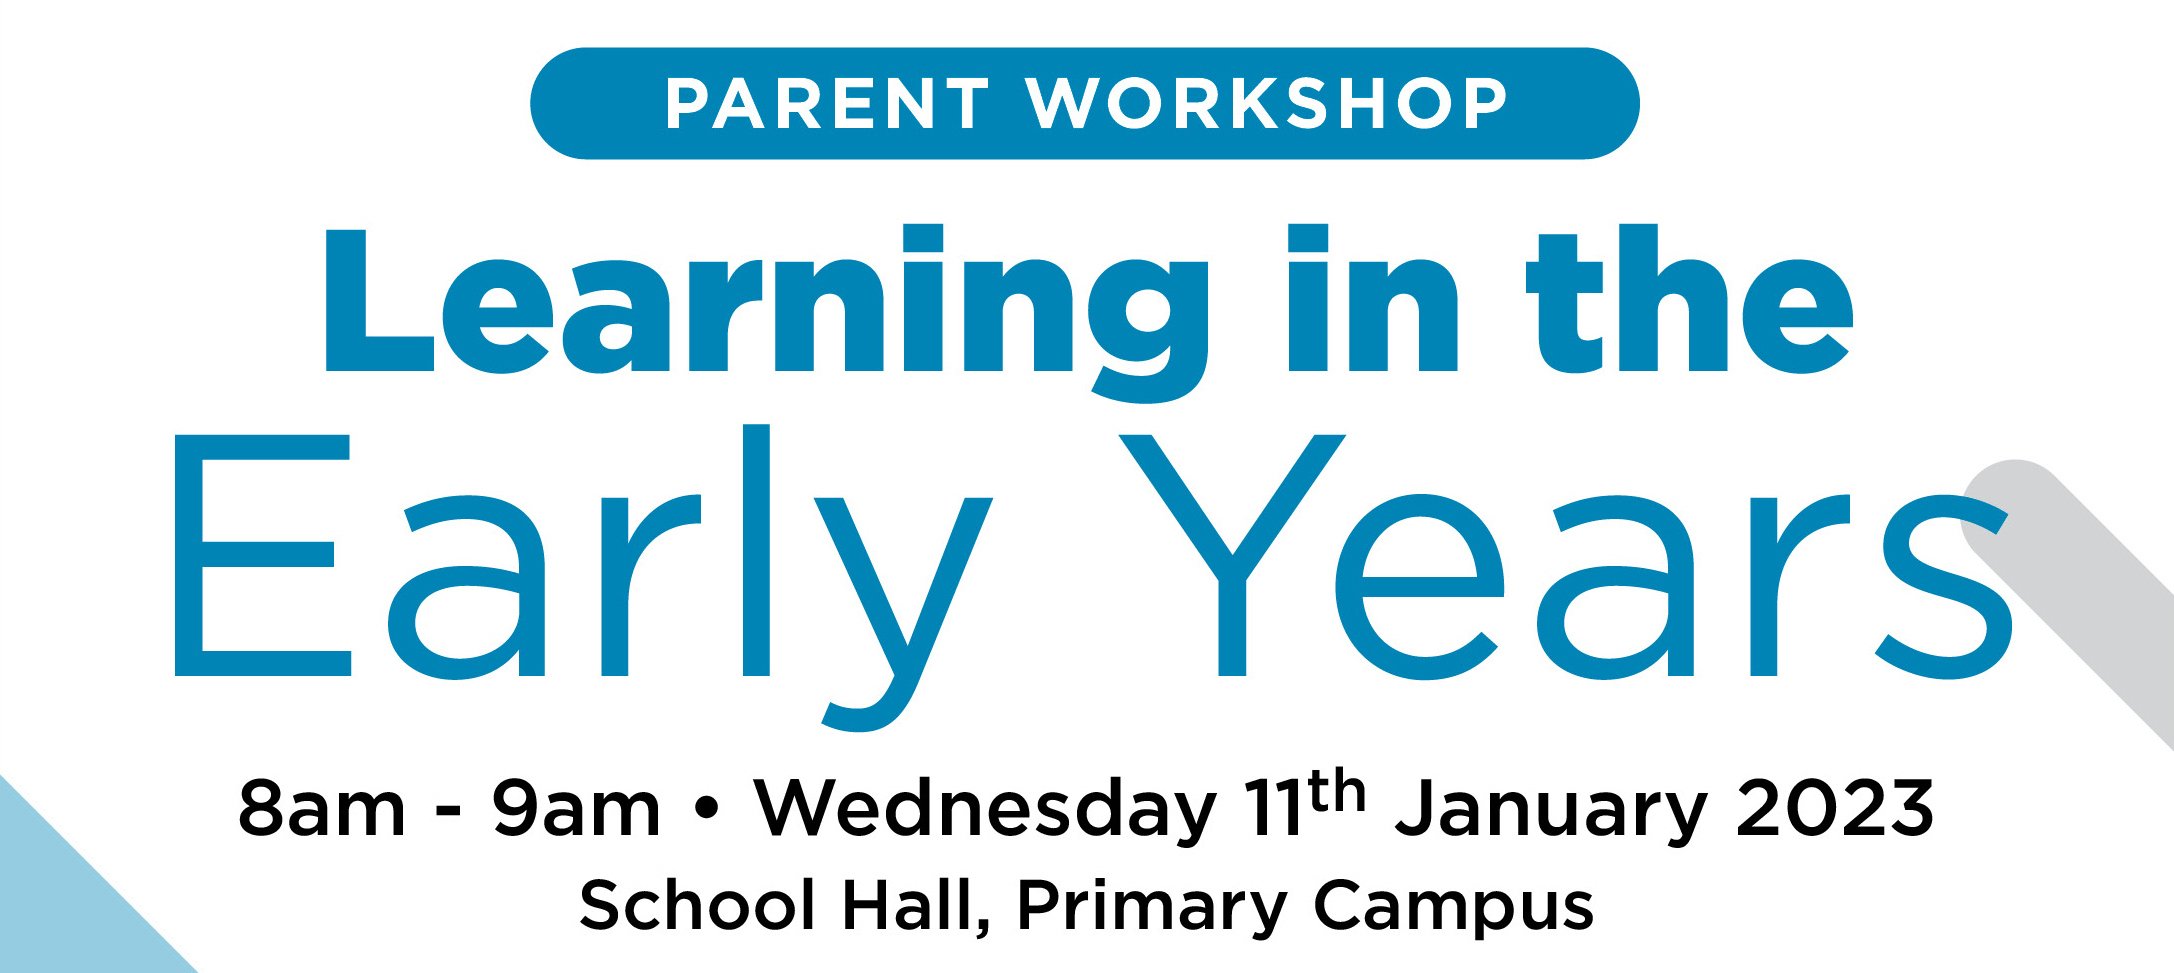 Parent Workshop with Early Years Expert, Jan Dubiel